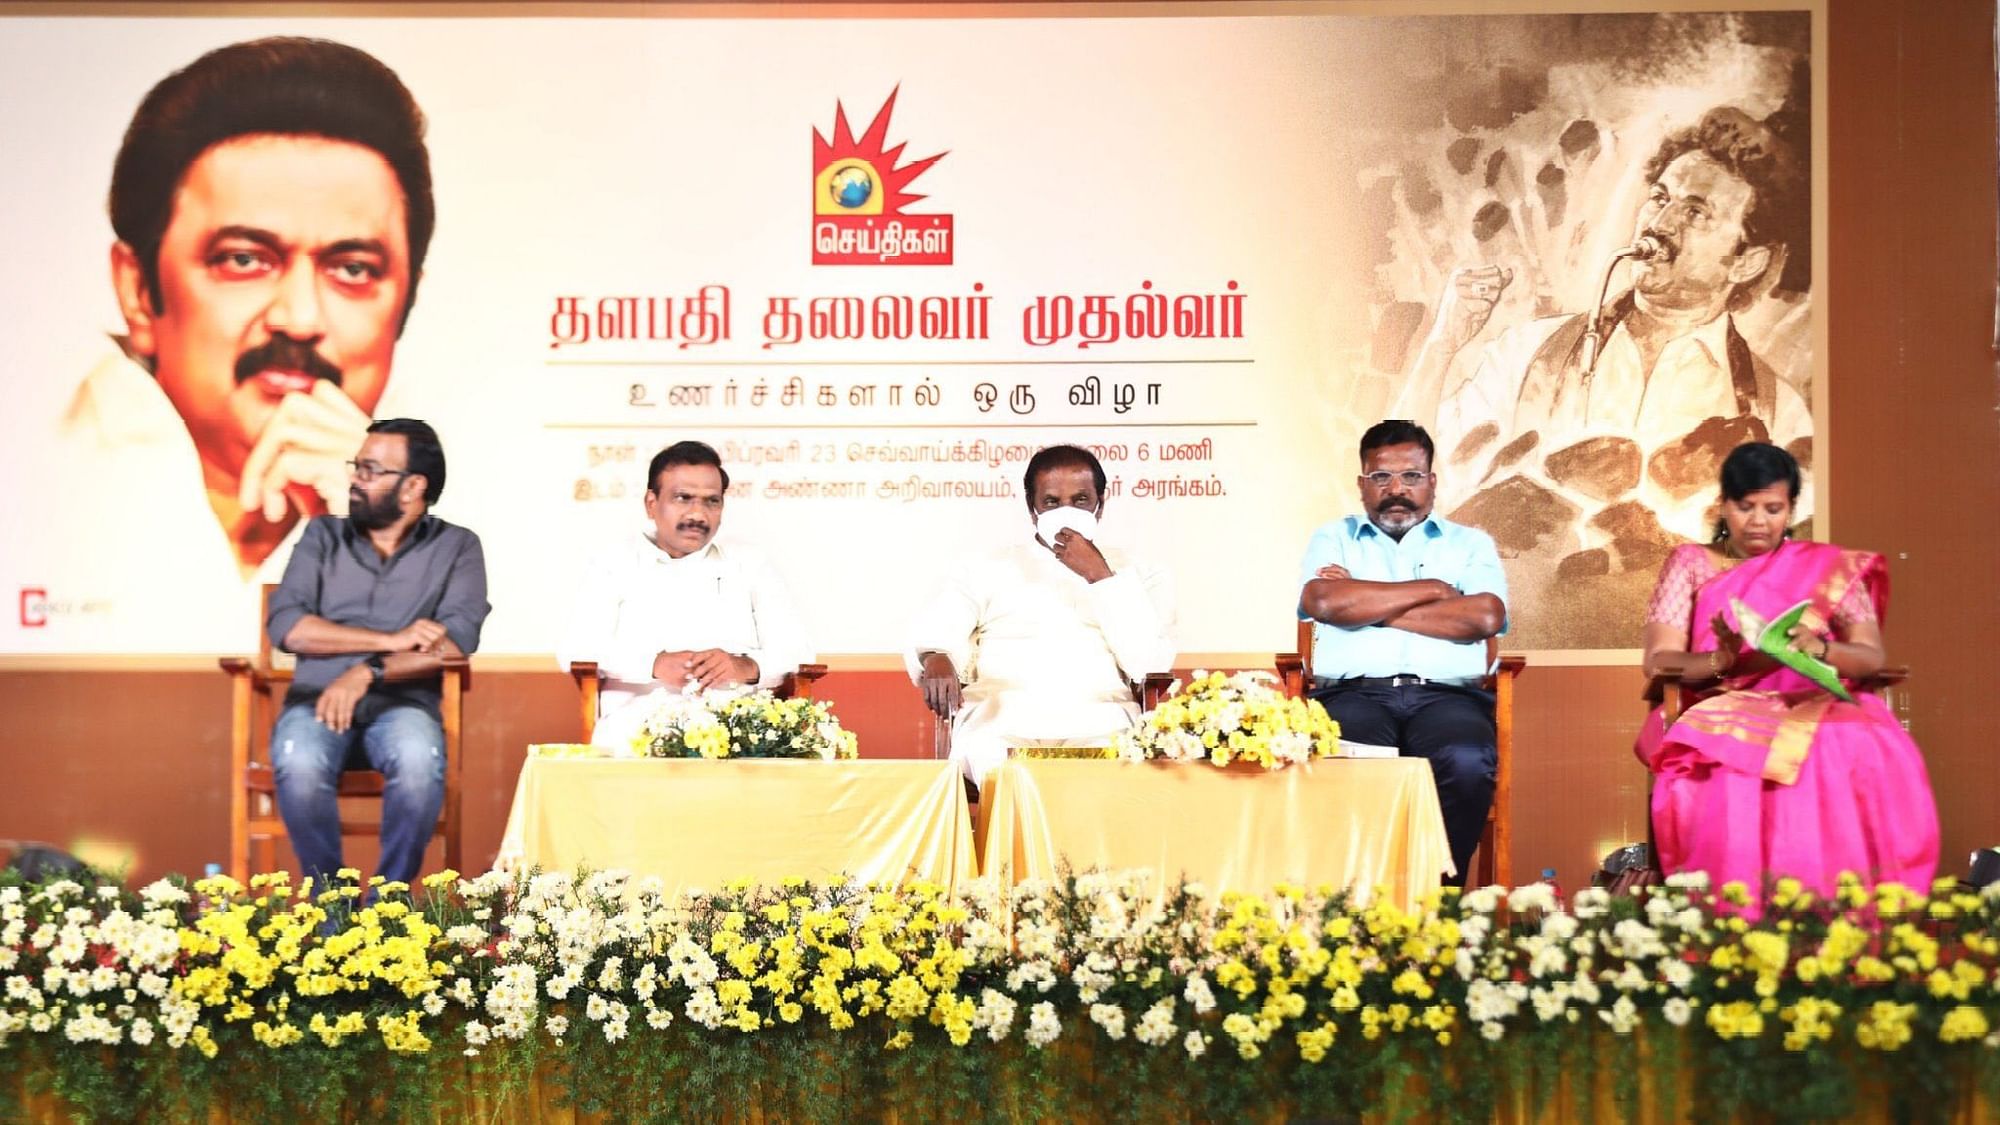 DMK President MK Stalin has been criticised for inviting poet and lyricist Vairamuthu, as the chief guest for an event.